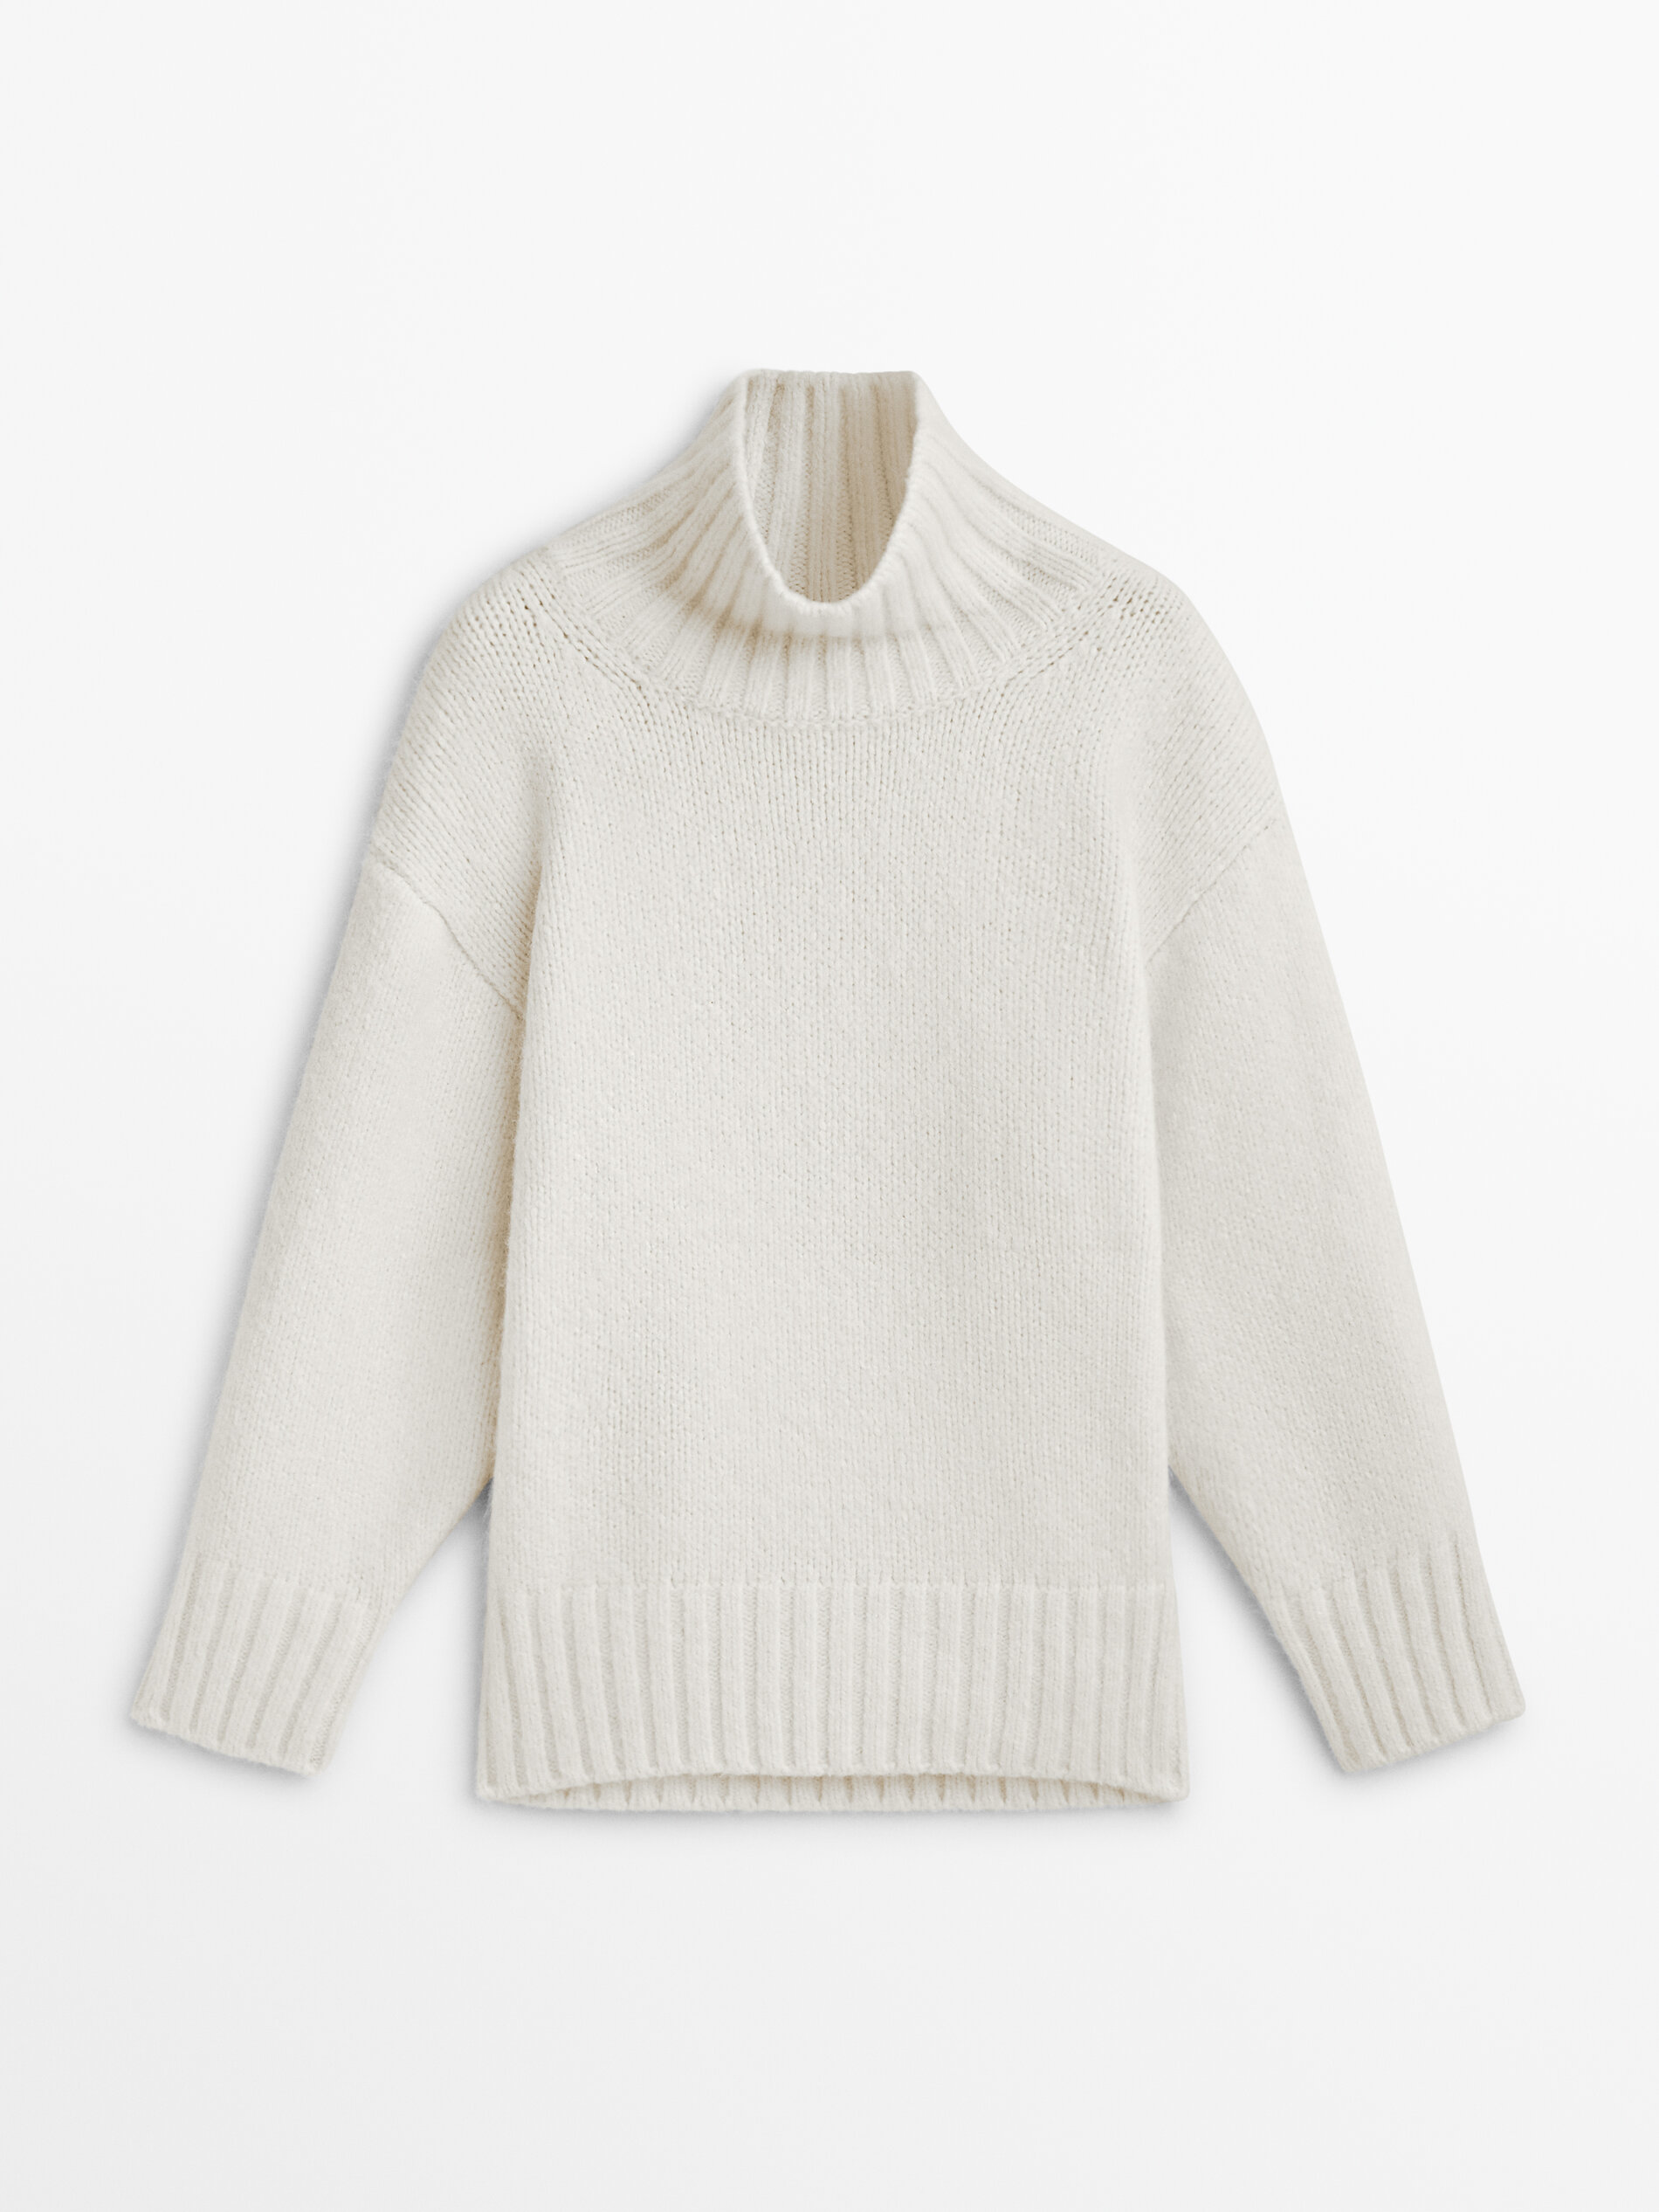 Knit high neck sweater - Limited Edition · Cream, Black · Sweaters